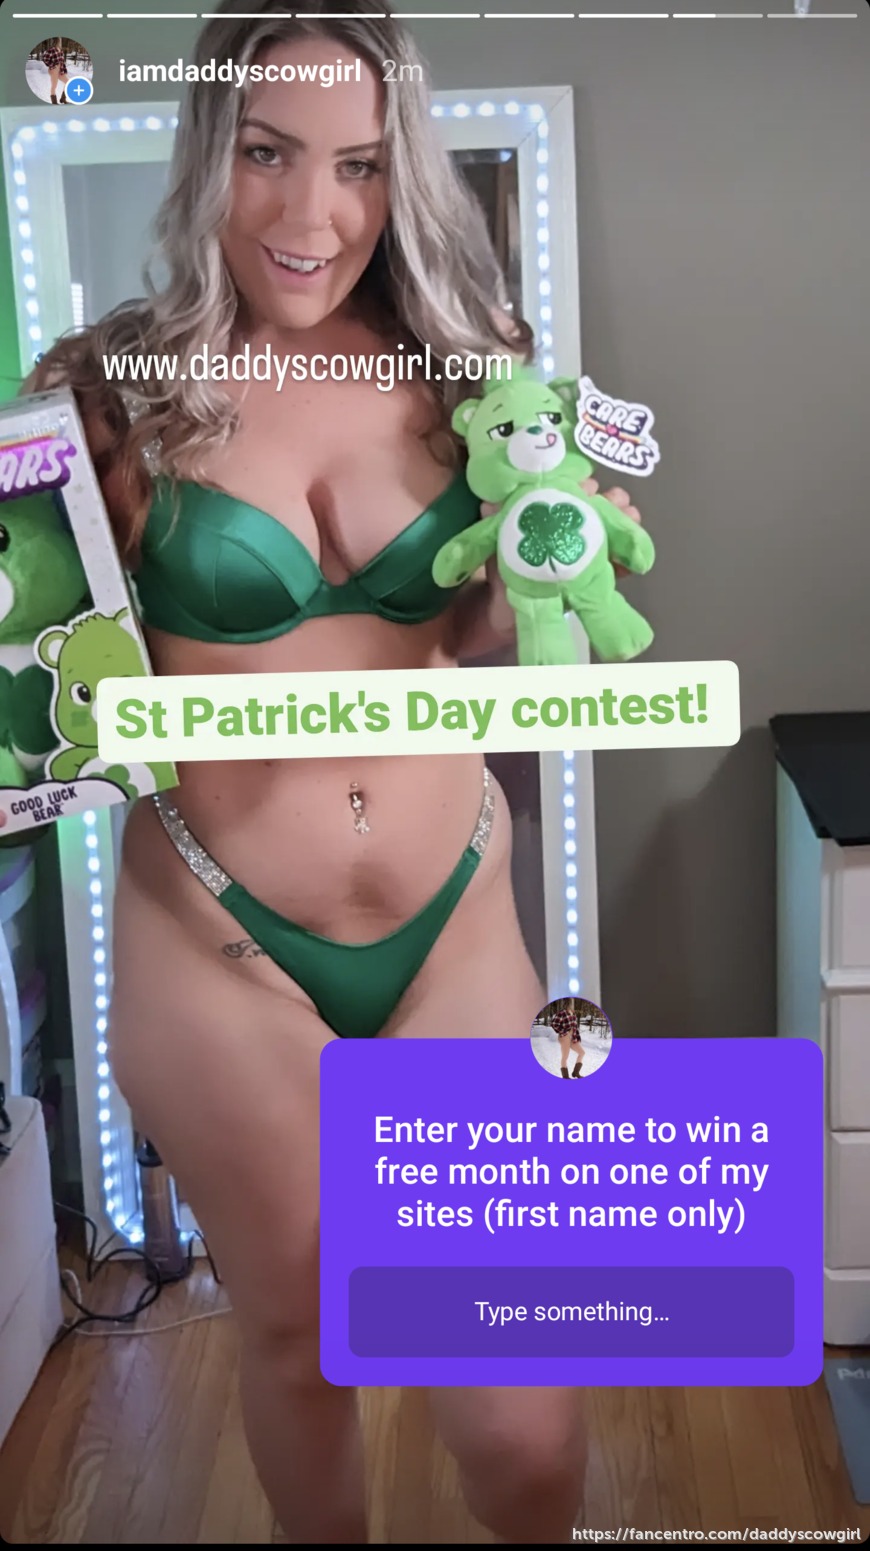 Contest! Win one free month on one of my sites!